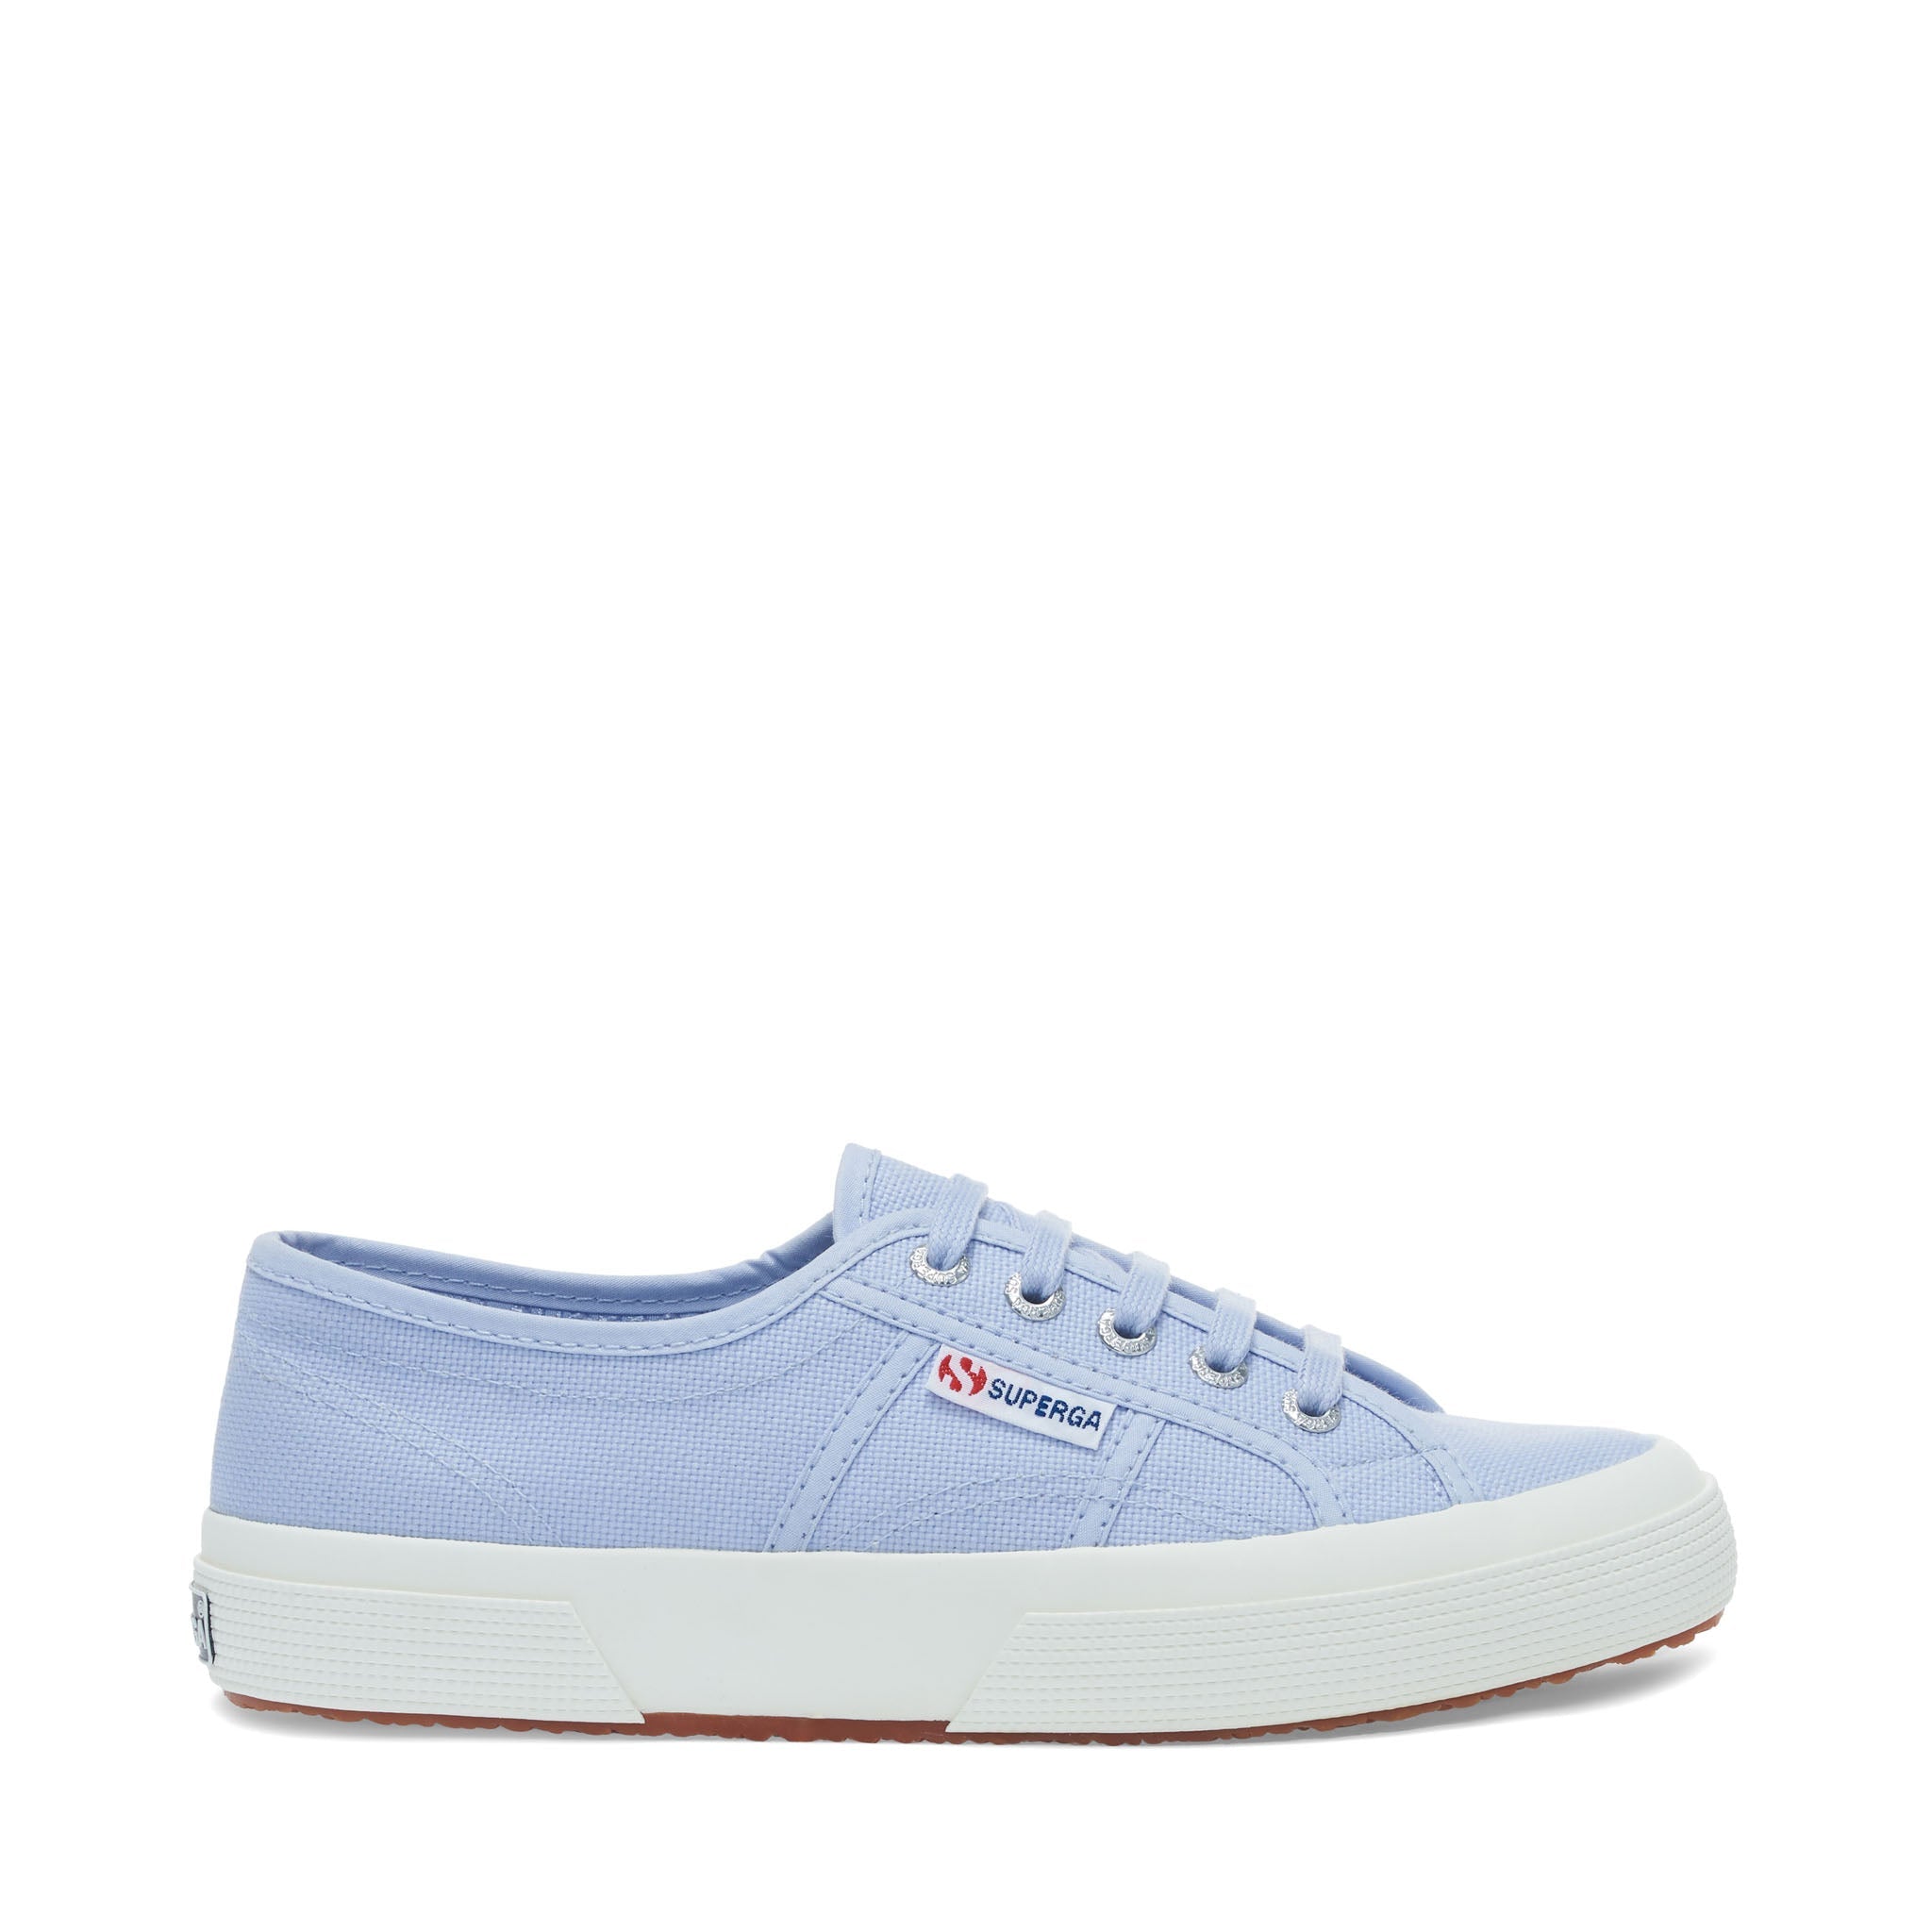 Women's Superga Sneakers & Athletic Shoes | Nordstrom